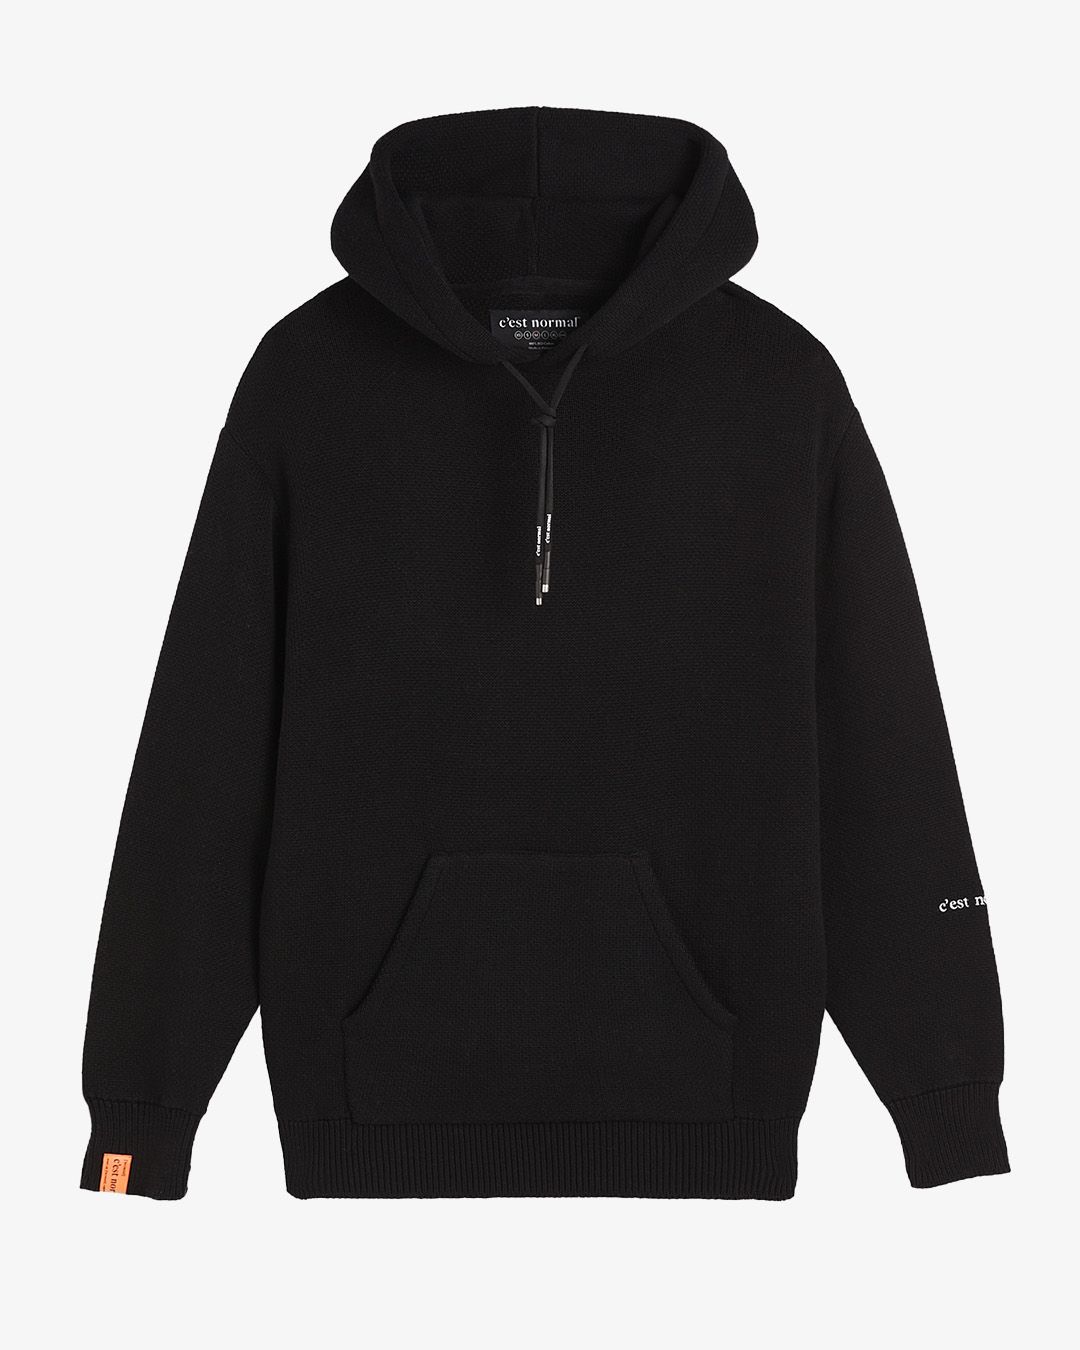 The Knitted Hoodie